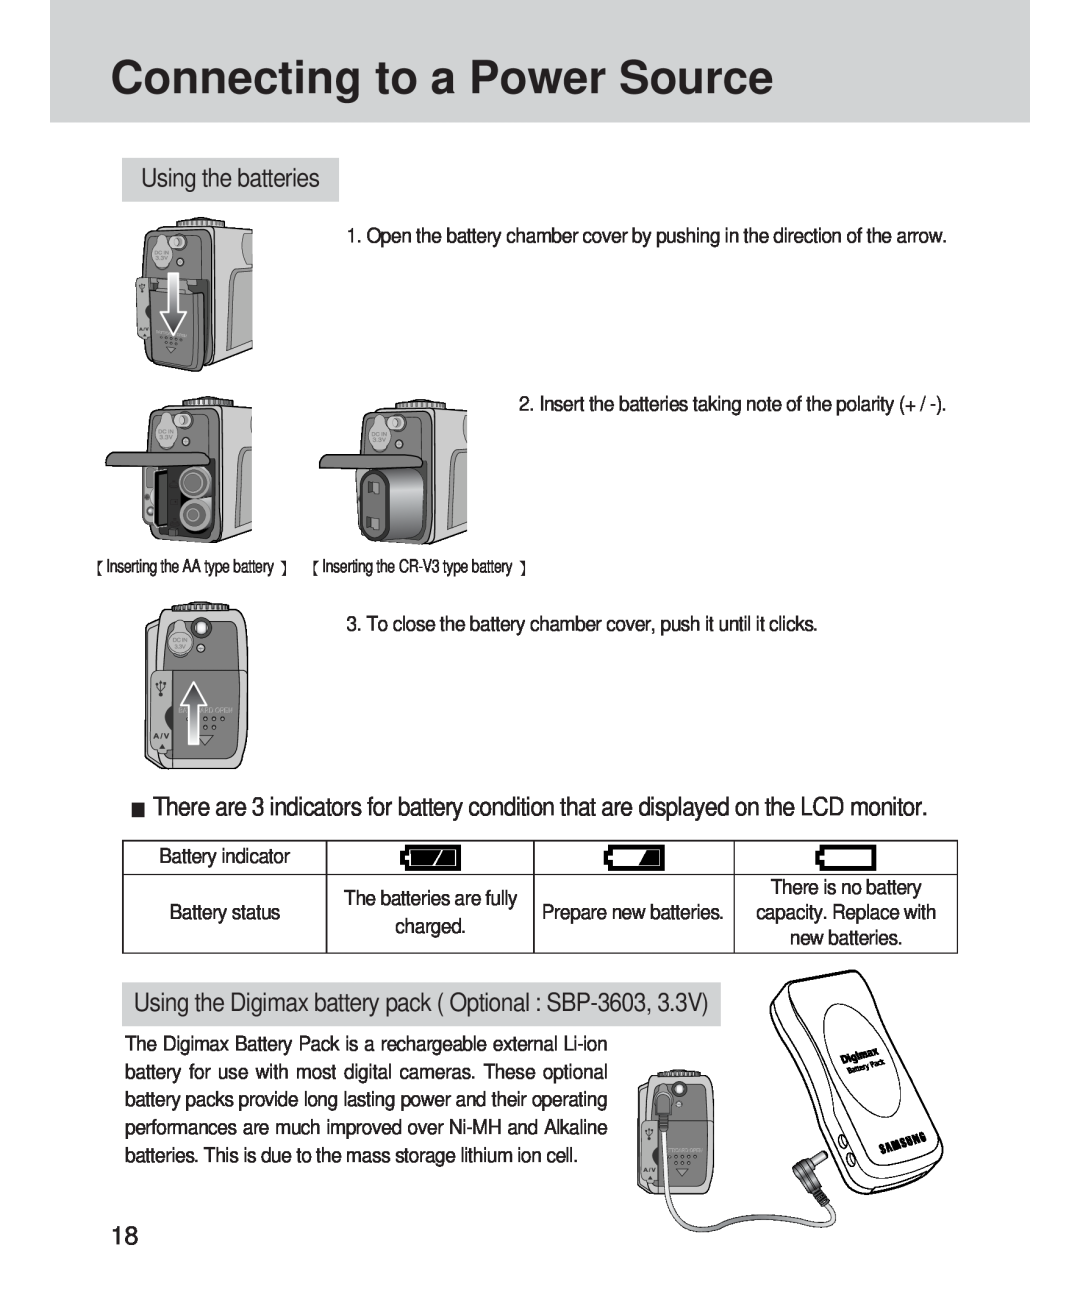 Samsung 420 manual Using the batteries, Using the Digimax battery pack Optional SBP-3603, Connecting to a Power Source 